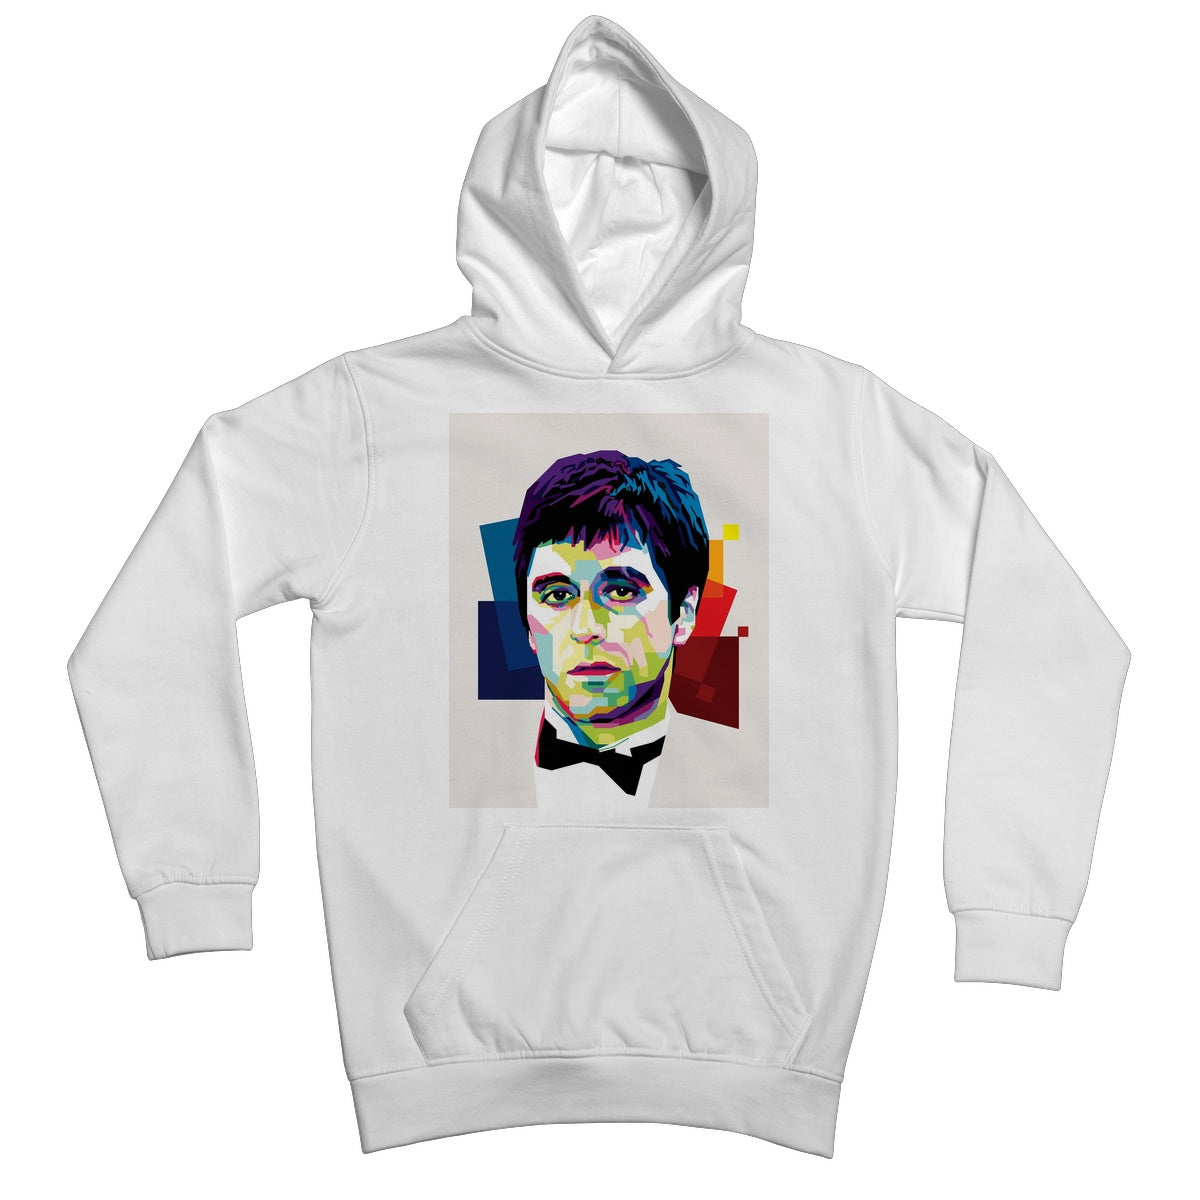 Pop art image of Al Pacino as Scarface on a white hoodie